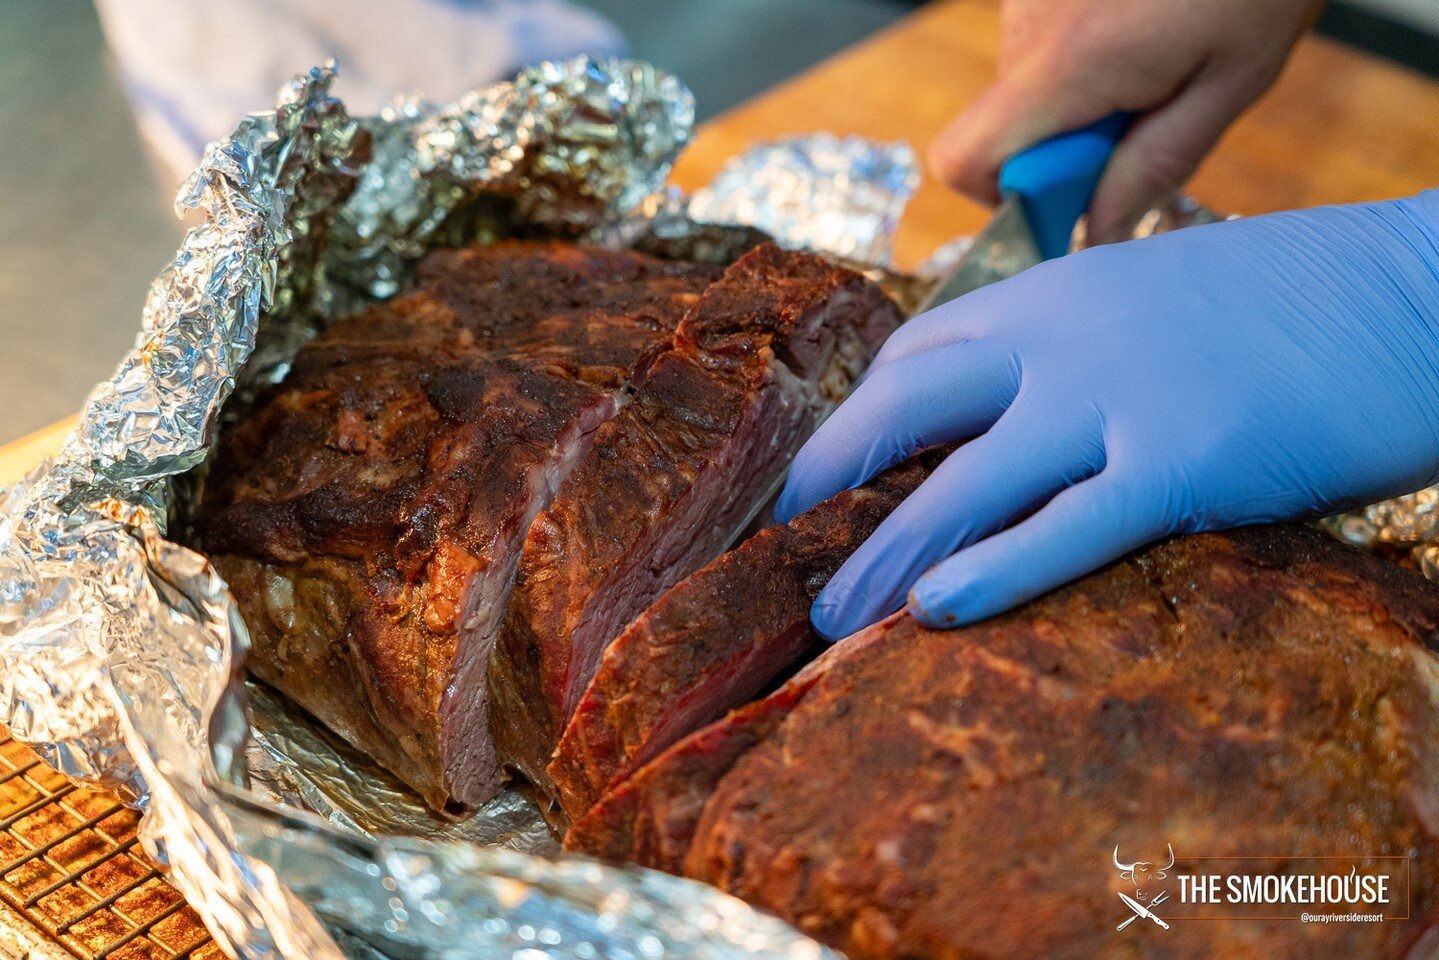 Planning a spring or summer event? ☀️ Take the stress out of it!  The Ouray Smokehouse has your catering covered. Delicious smoked feasts, small gatherings, and big parties &ndash; we make it easy AND tasty.

Drop us an email to get started-info@oura